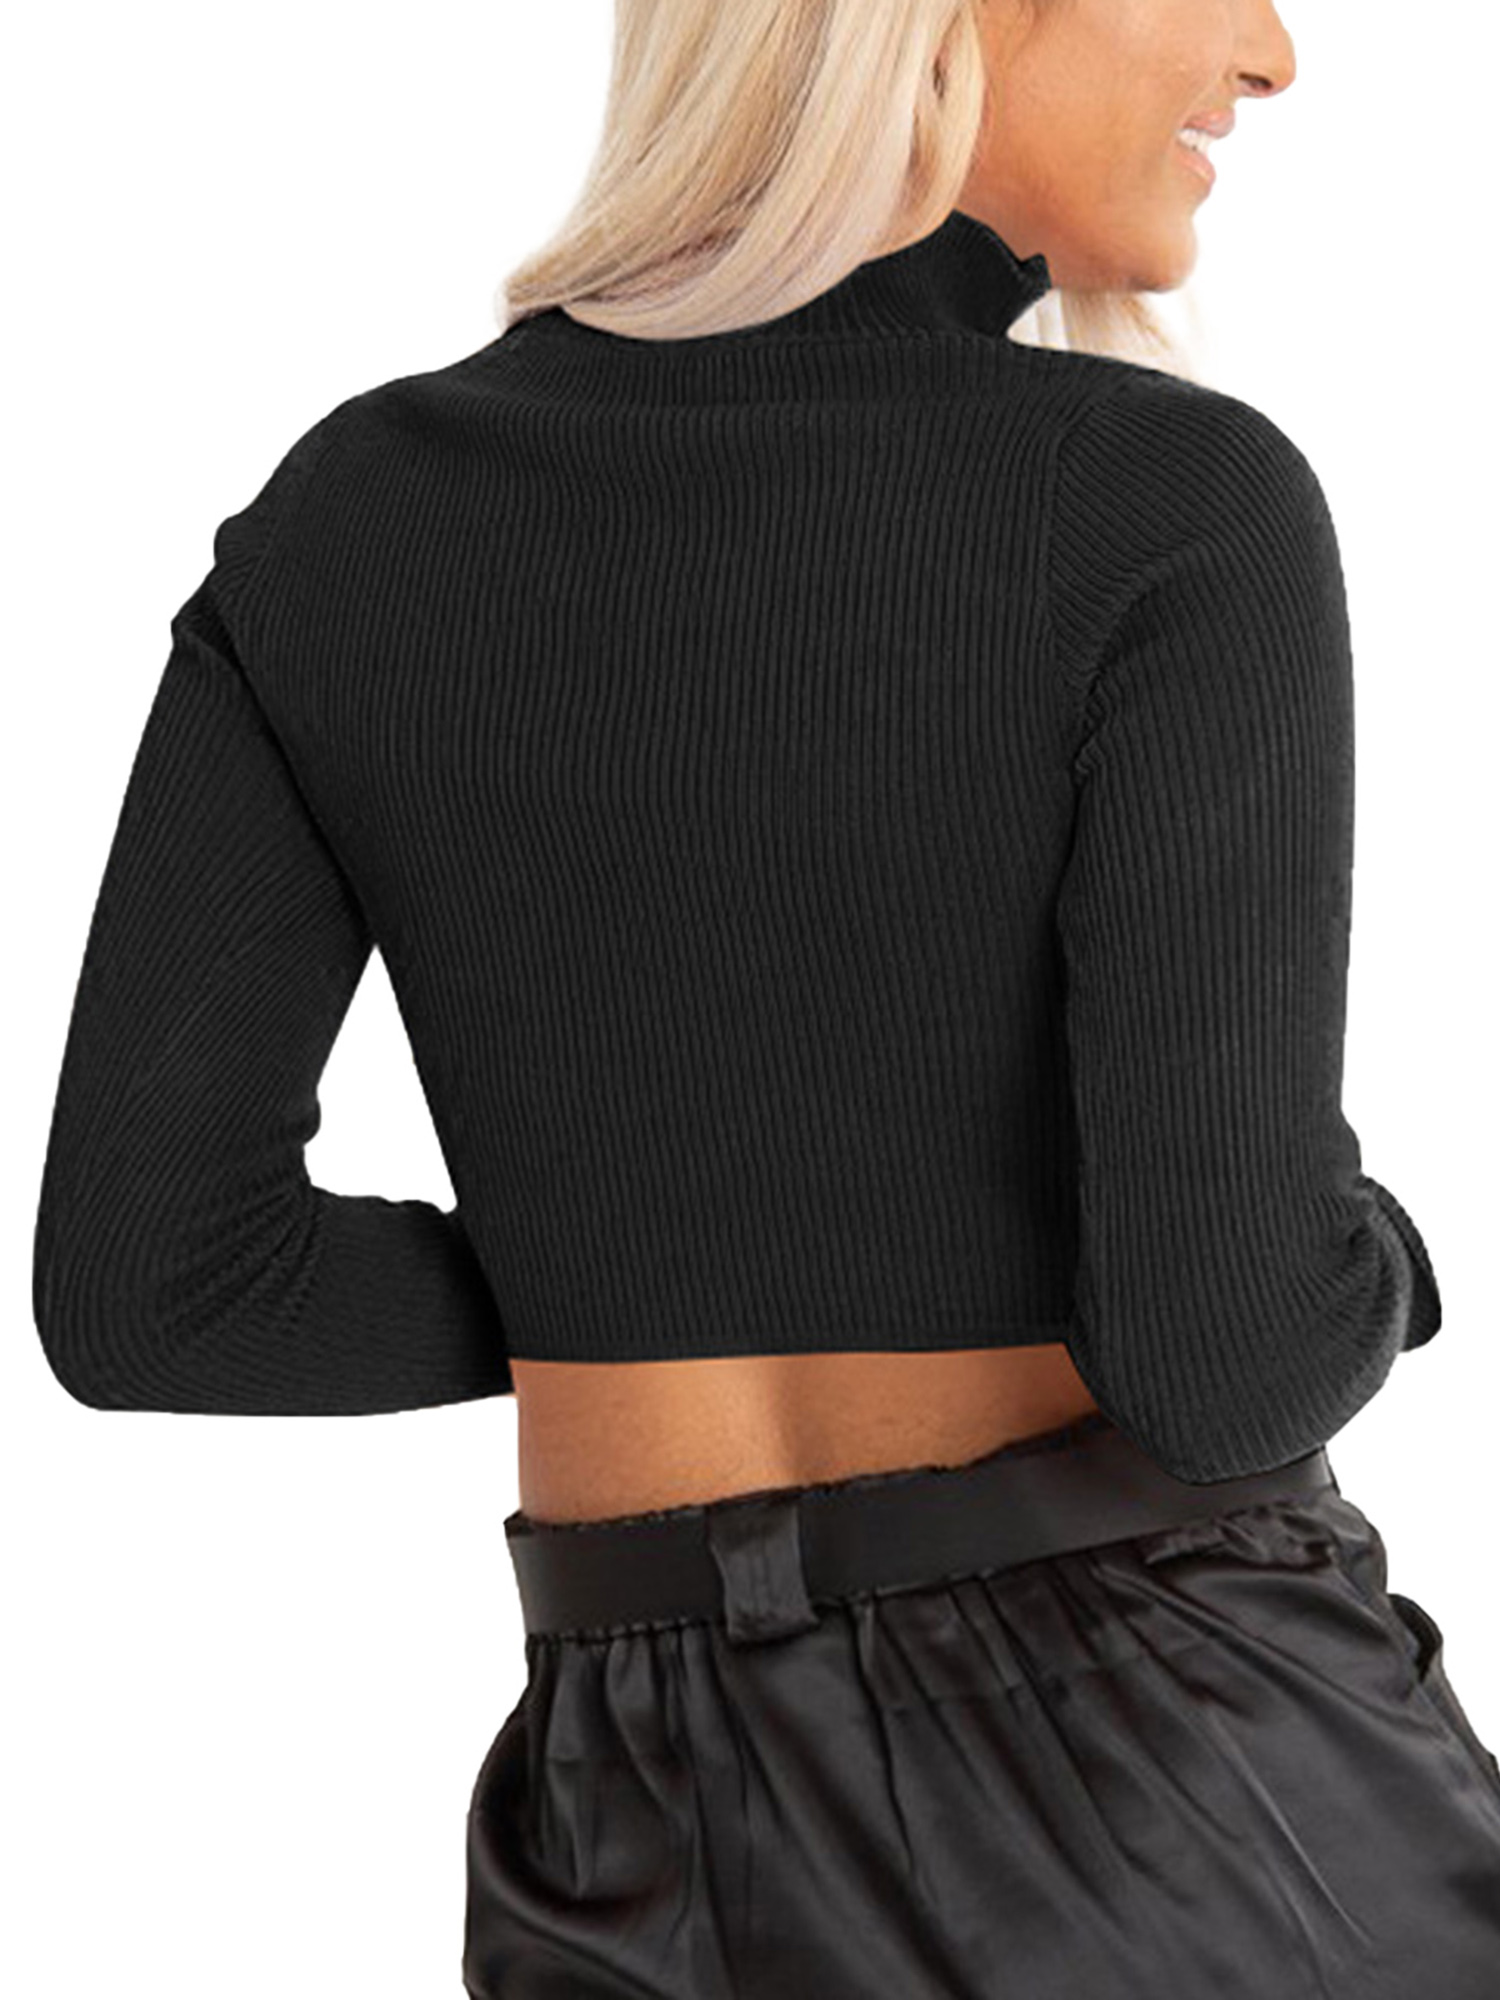 ✿-LZZ-✿-Women´s Rib Knit Crop Top Long Sleeve Stand Collar Zipper Front Slim Fit Solid Color Basic Tee Shirt